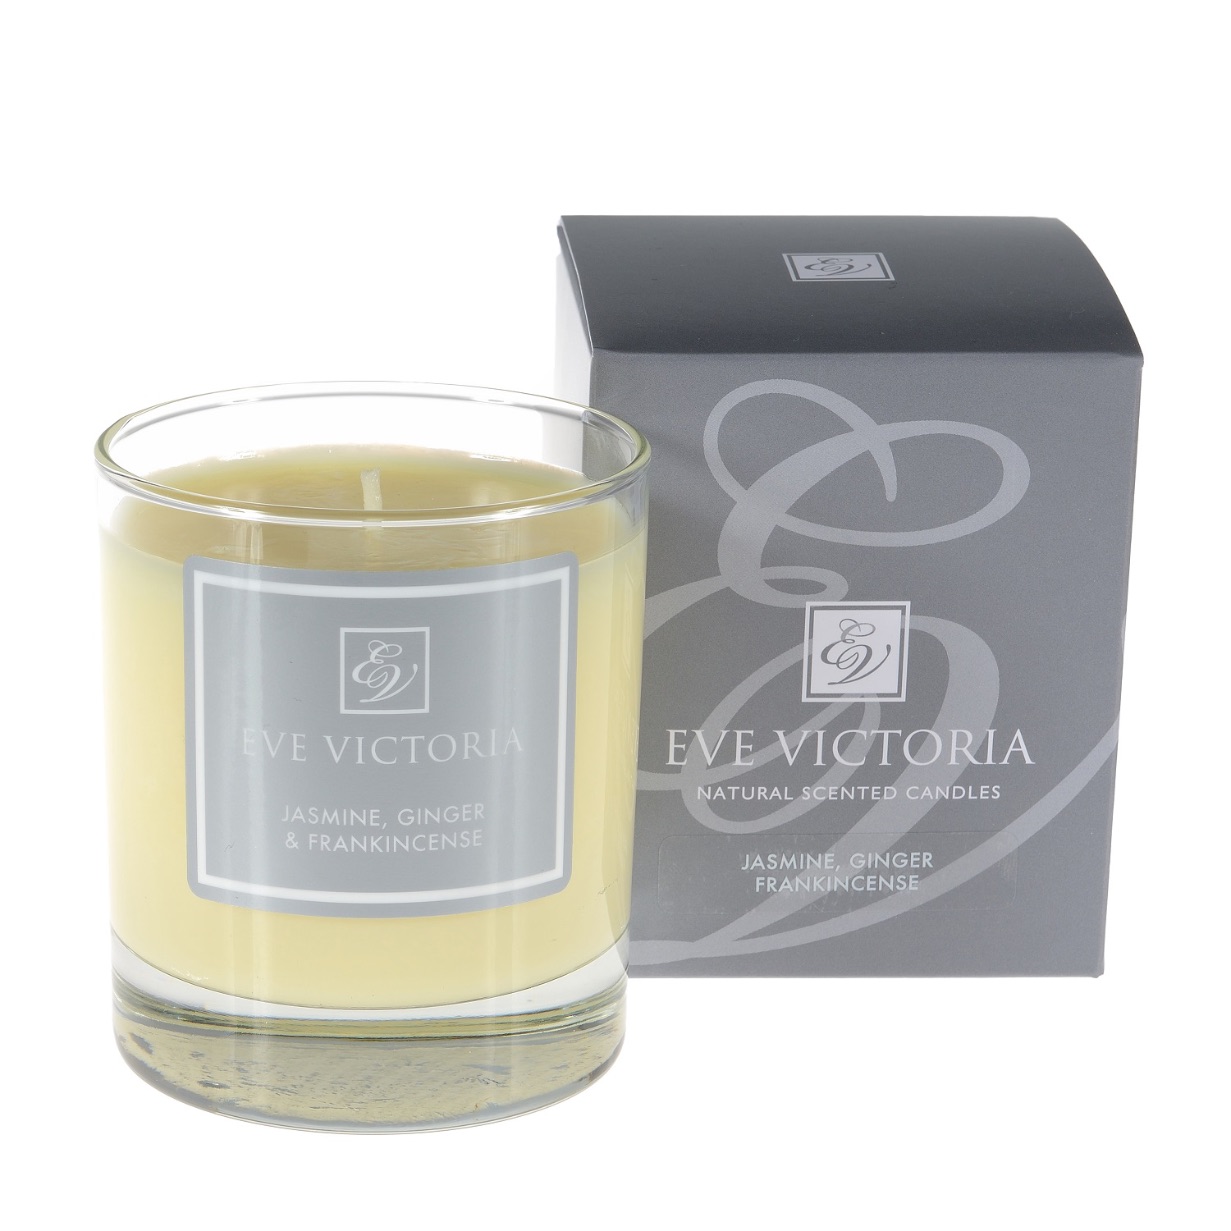 Eve Victoria Jasmine, Ginger & Frankincense Small Candle